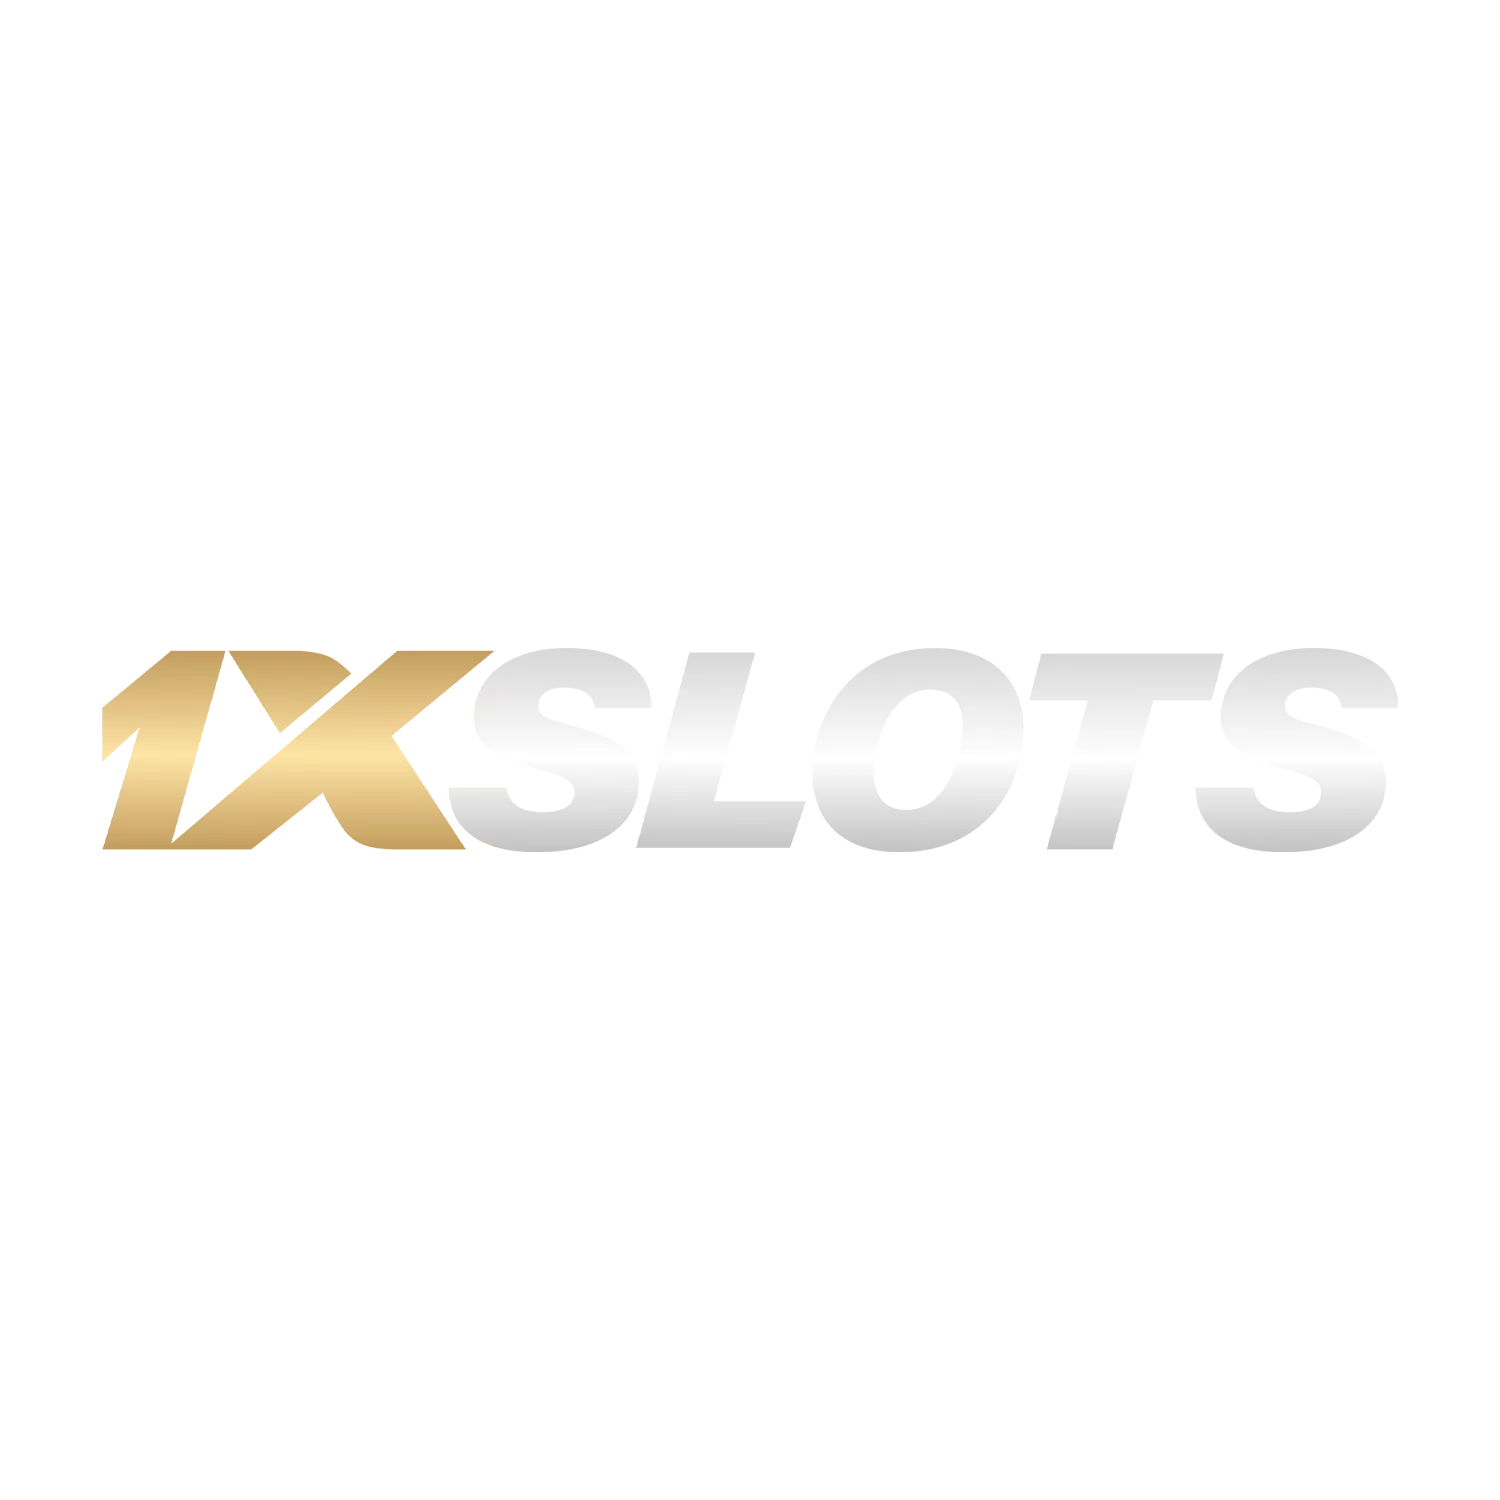 Learn about the 1xSlots Casino where you can play slots and table games with a live dealer.